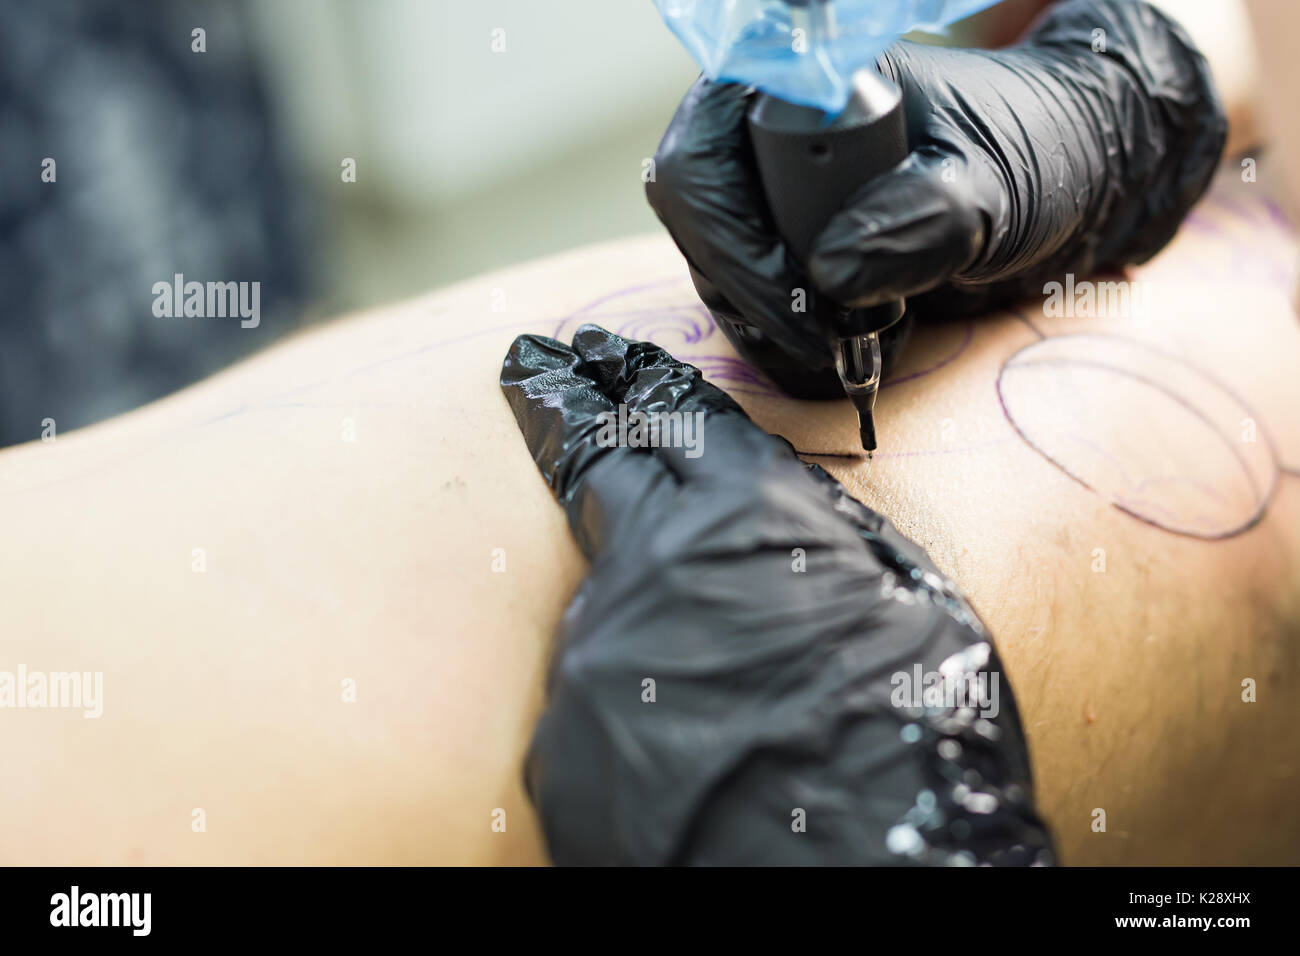 Professional tattooer make the tattoo with gloves on by special tool close up. Stock Photo